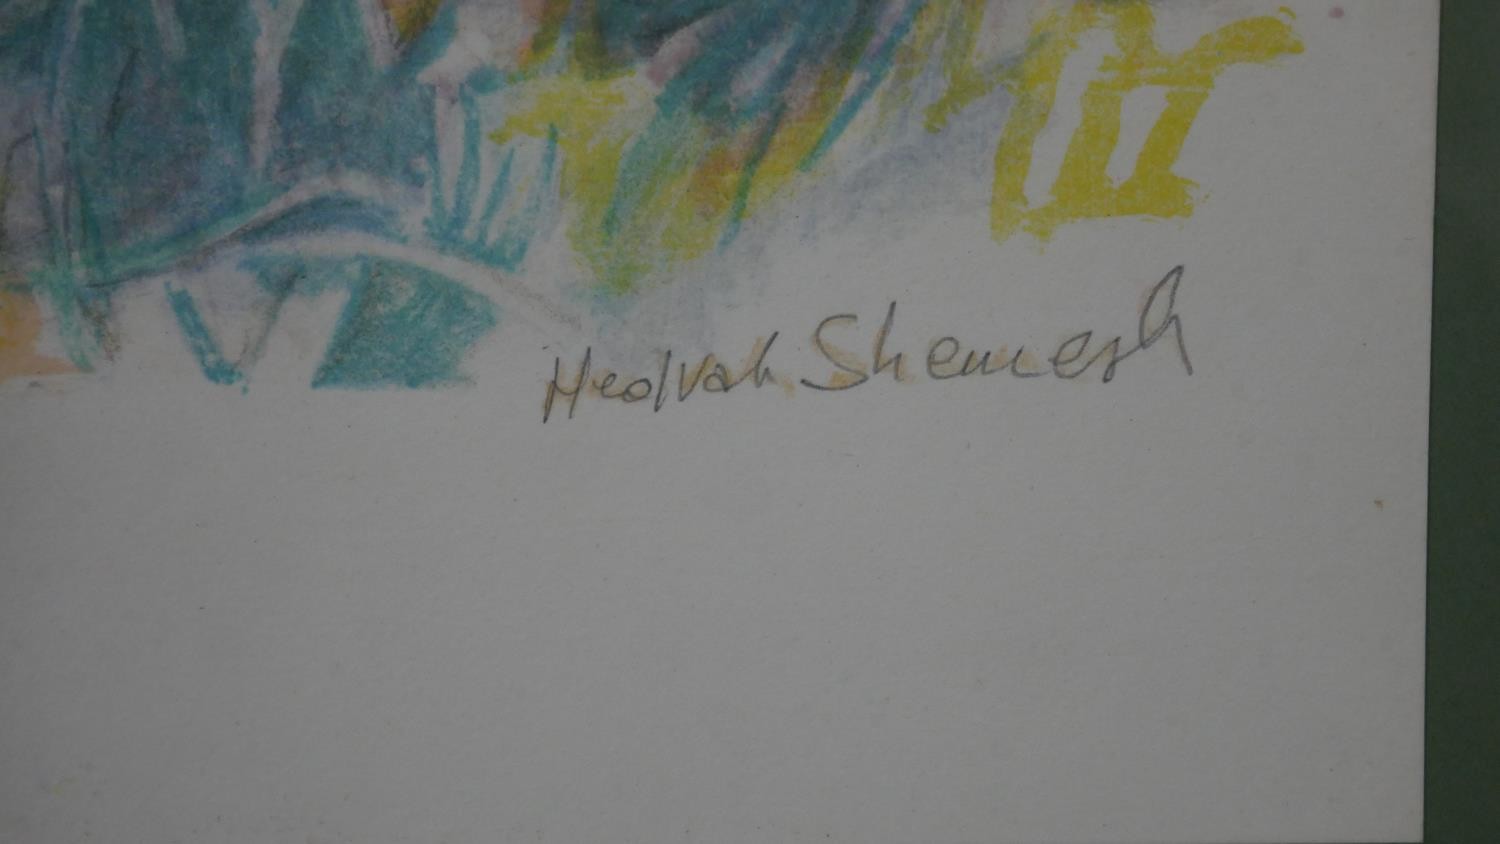 Hedvah Shemesh, coloured lithograph, colourful abstract composition, signed, edition 37/150. H.42 - Image 4 of 5